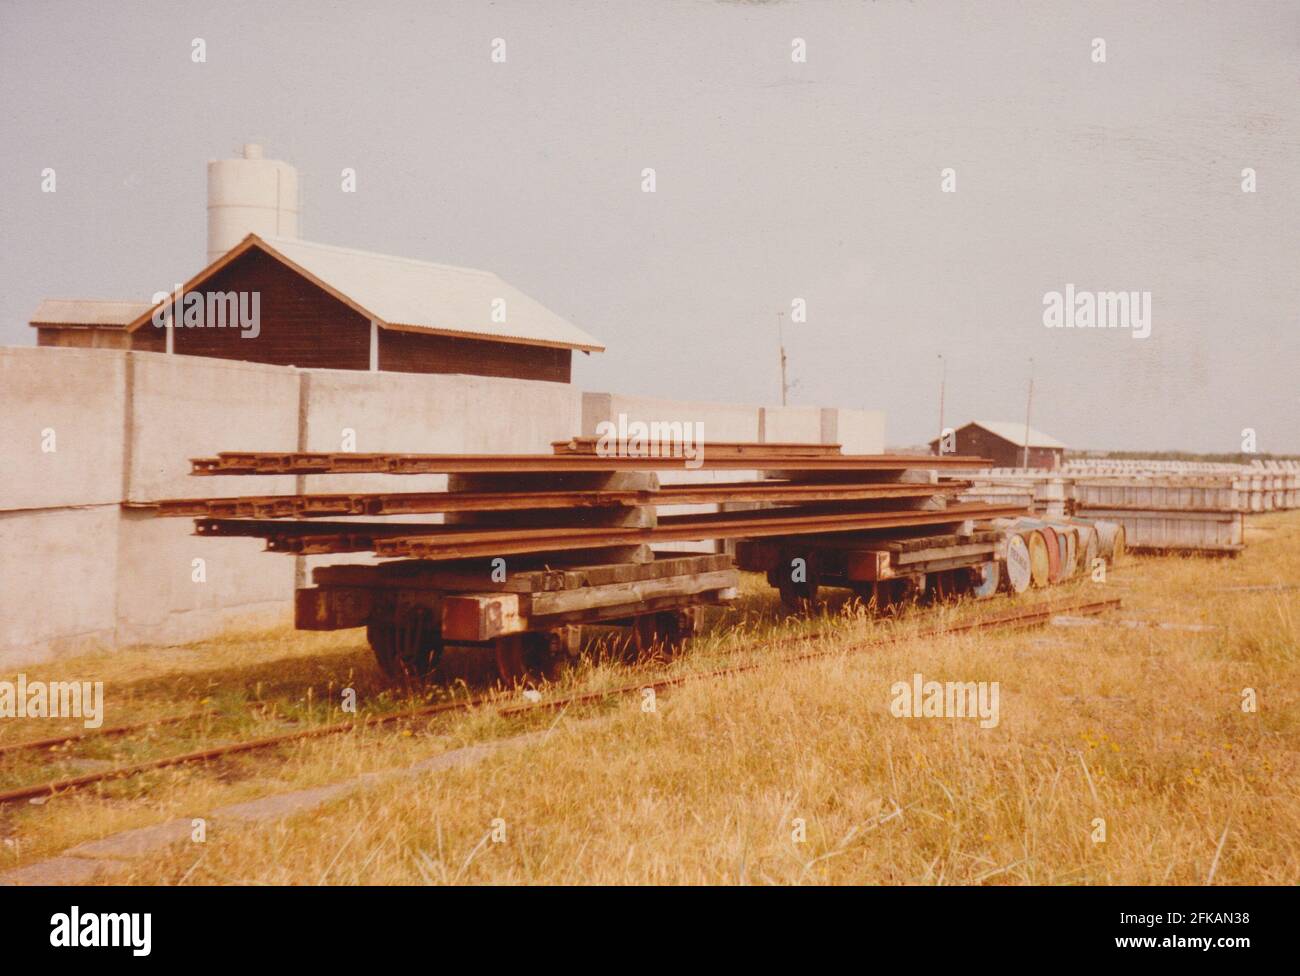 Agger, Denmark - 1983: The workshops of the coasst maintenance 'Vandbygningsv�senet' with the now removed narrow gauge railway tracks (785mm). Two rail carriages with removed rails from the outer rail enetwork Stock Photo